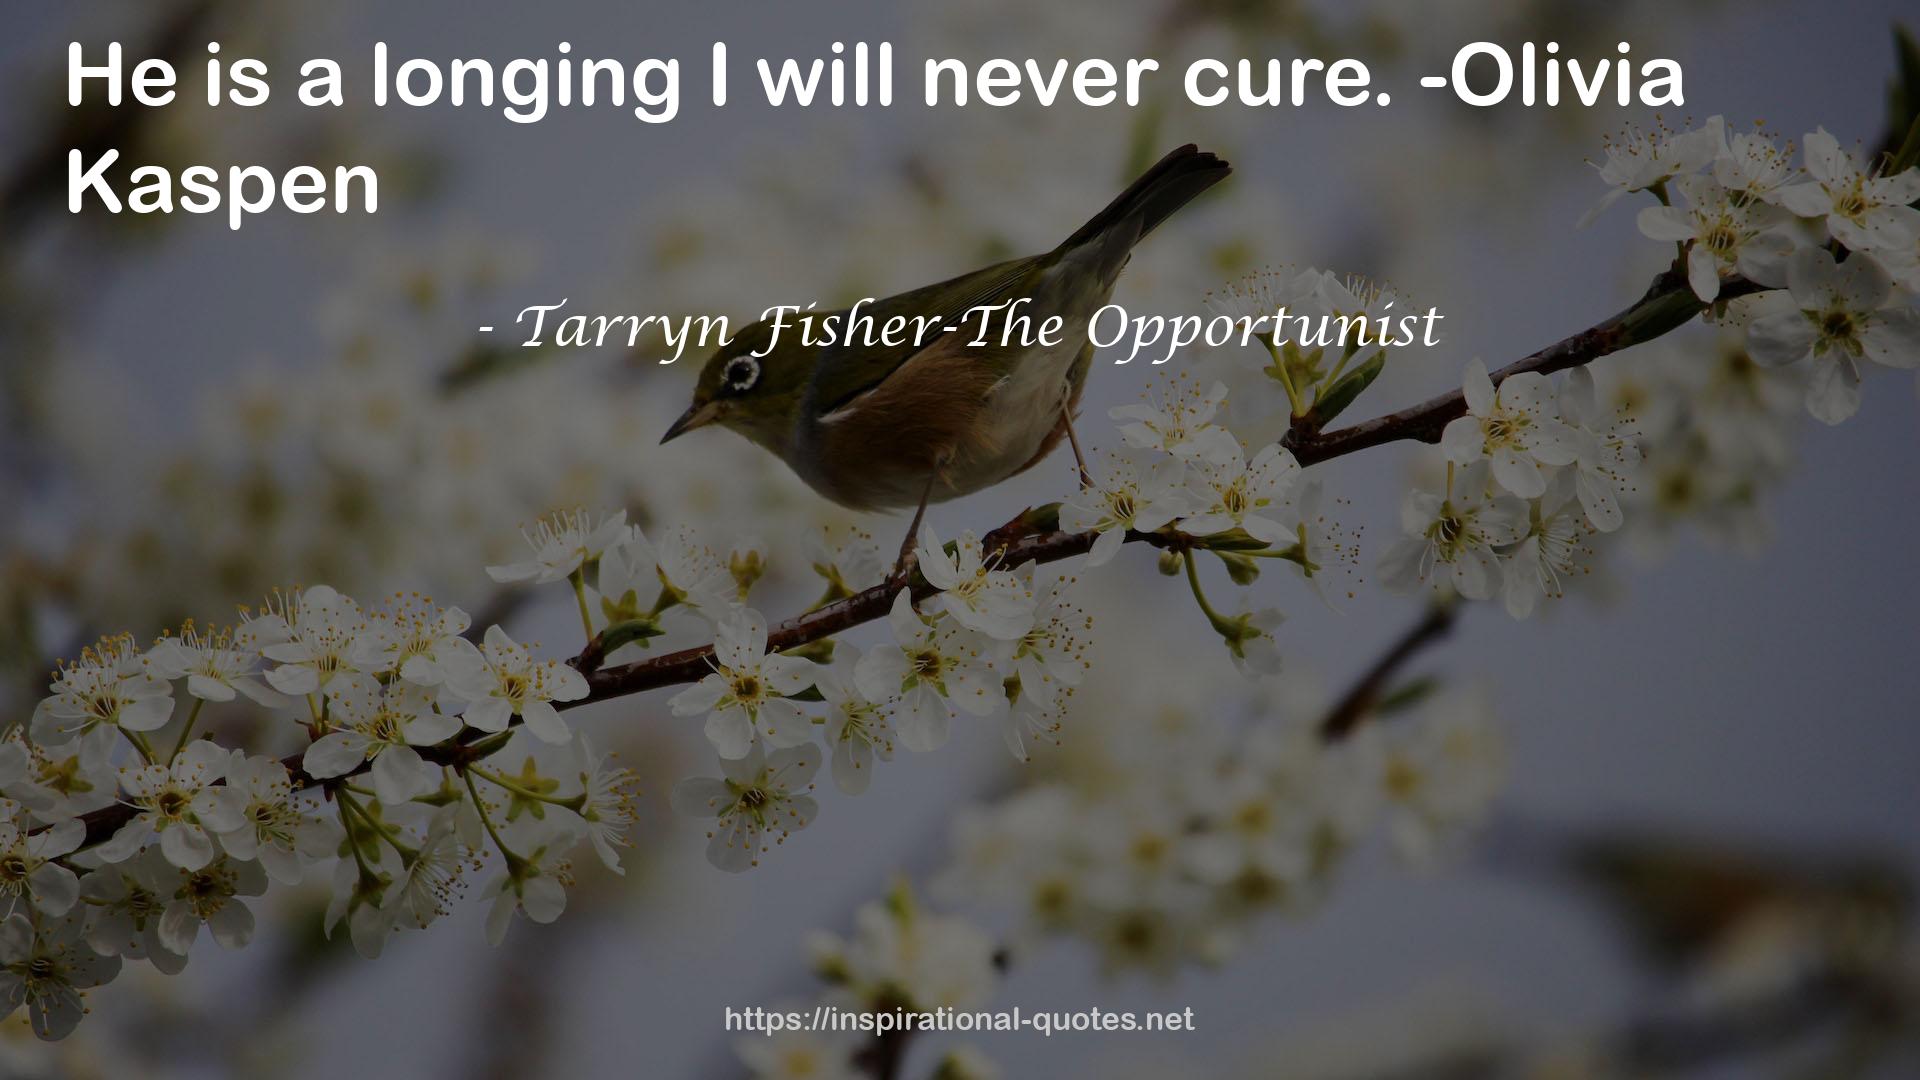 Tarryn Fisher-The Opportunist QUOTES